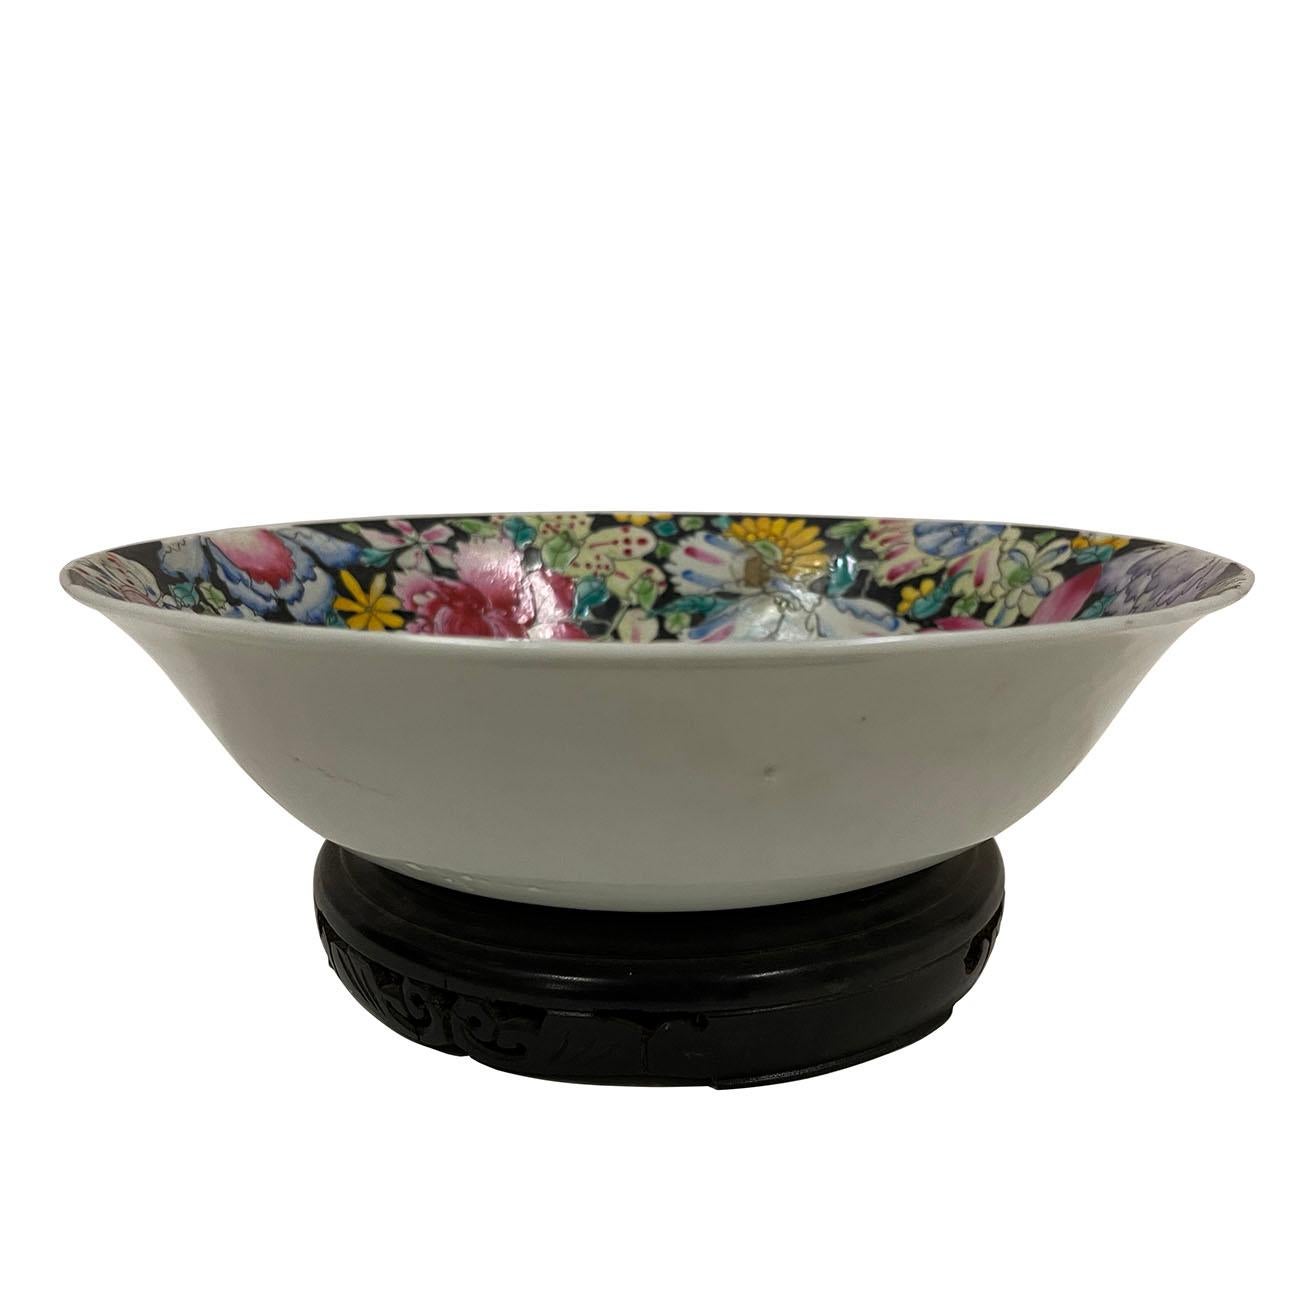 This is an Antique Chinese Famille Rose Porcelain Bowl. As you can see in the pictures, it is in very good conditions. It shows very neat unique design and hand painted floral inside bowl. There is the mark 